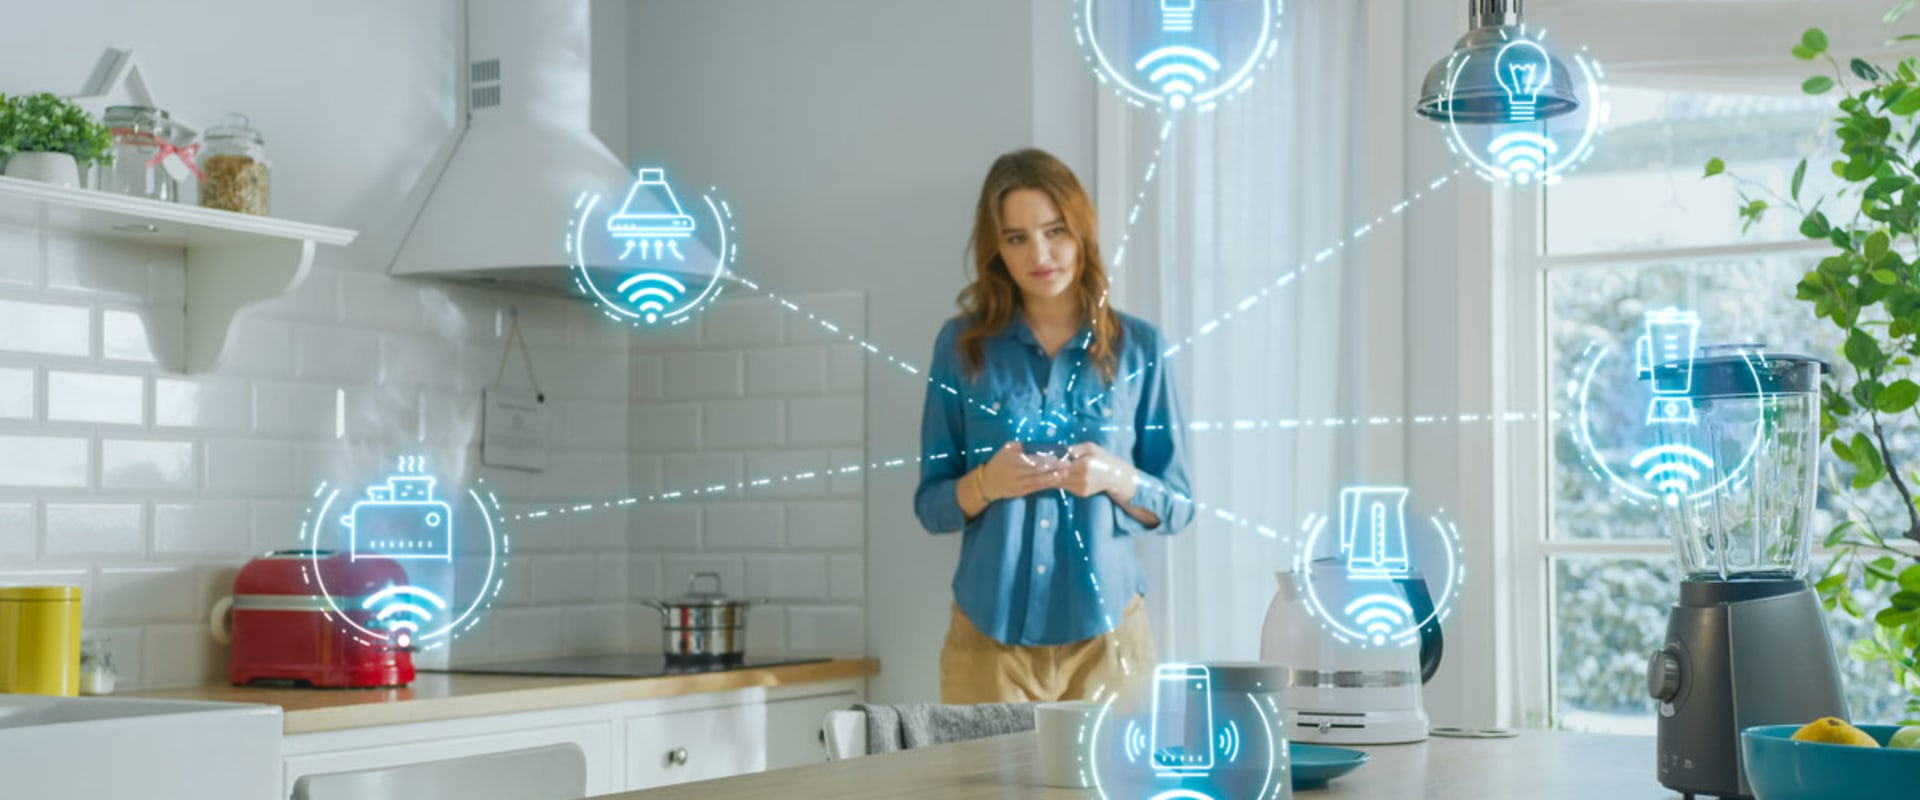 How to Integrate Smart Home Technology for a Modern Kitchen Upgrade